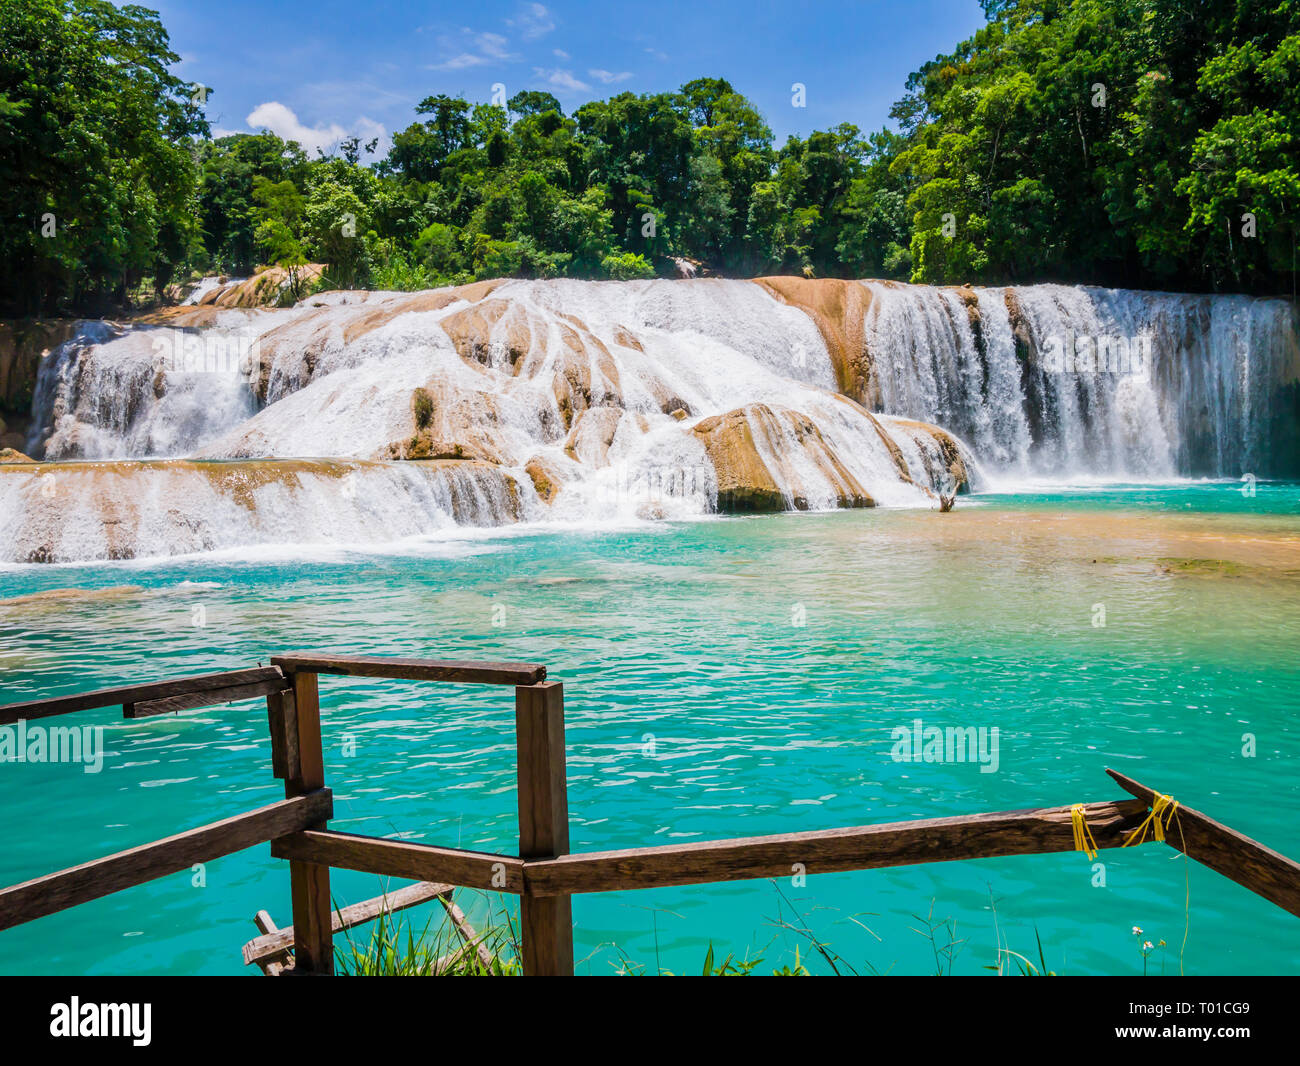 Amazing view of Agua Azul waterfalls in the lush rainforest of Chiapas, Mexico Stock Photo